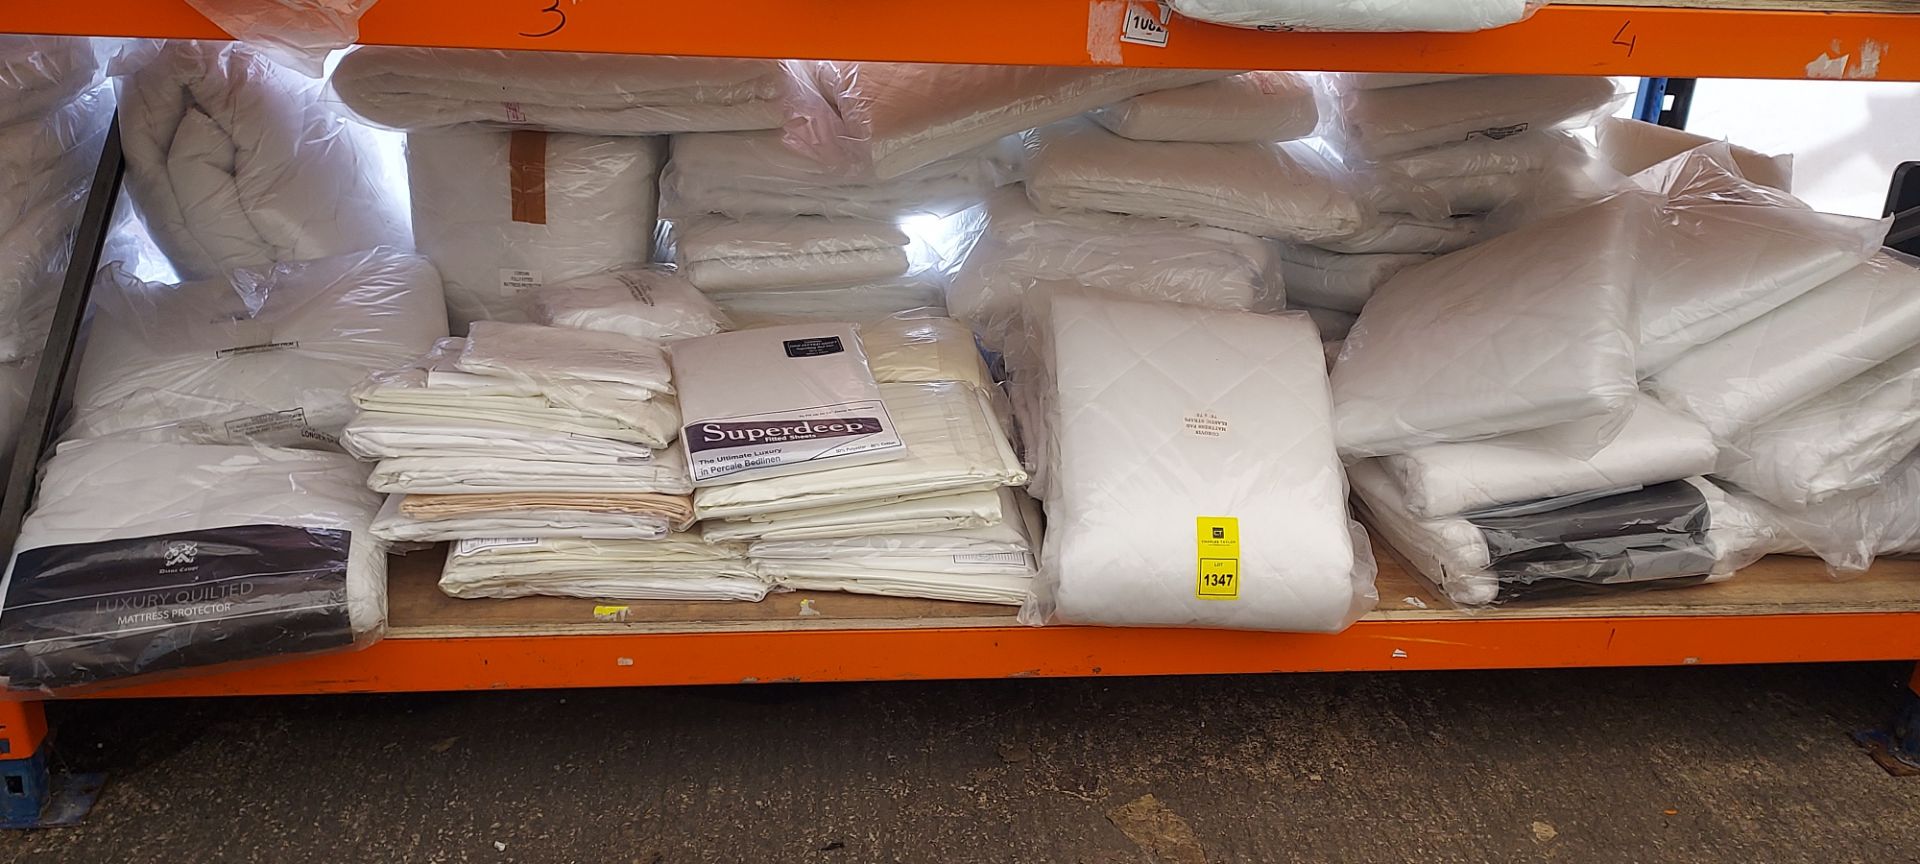 30 + BRAND NEW BEDDING LOT CONTAINING SUPER DEEP FITTED SHEETS THE ULTIMATE LUXURY IN PERCALE